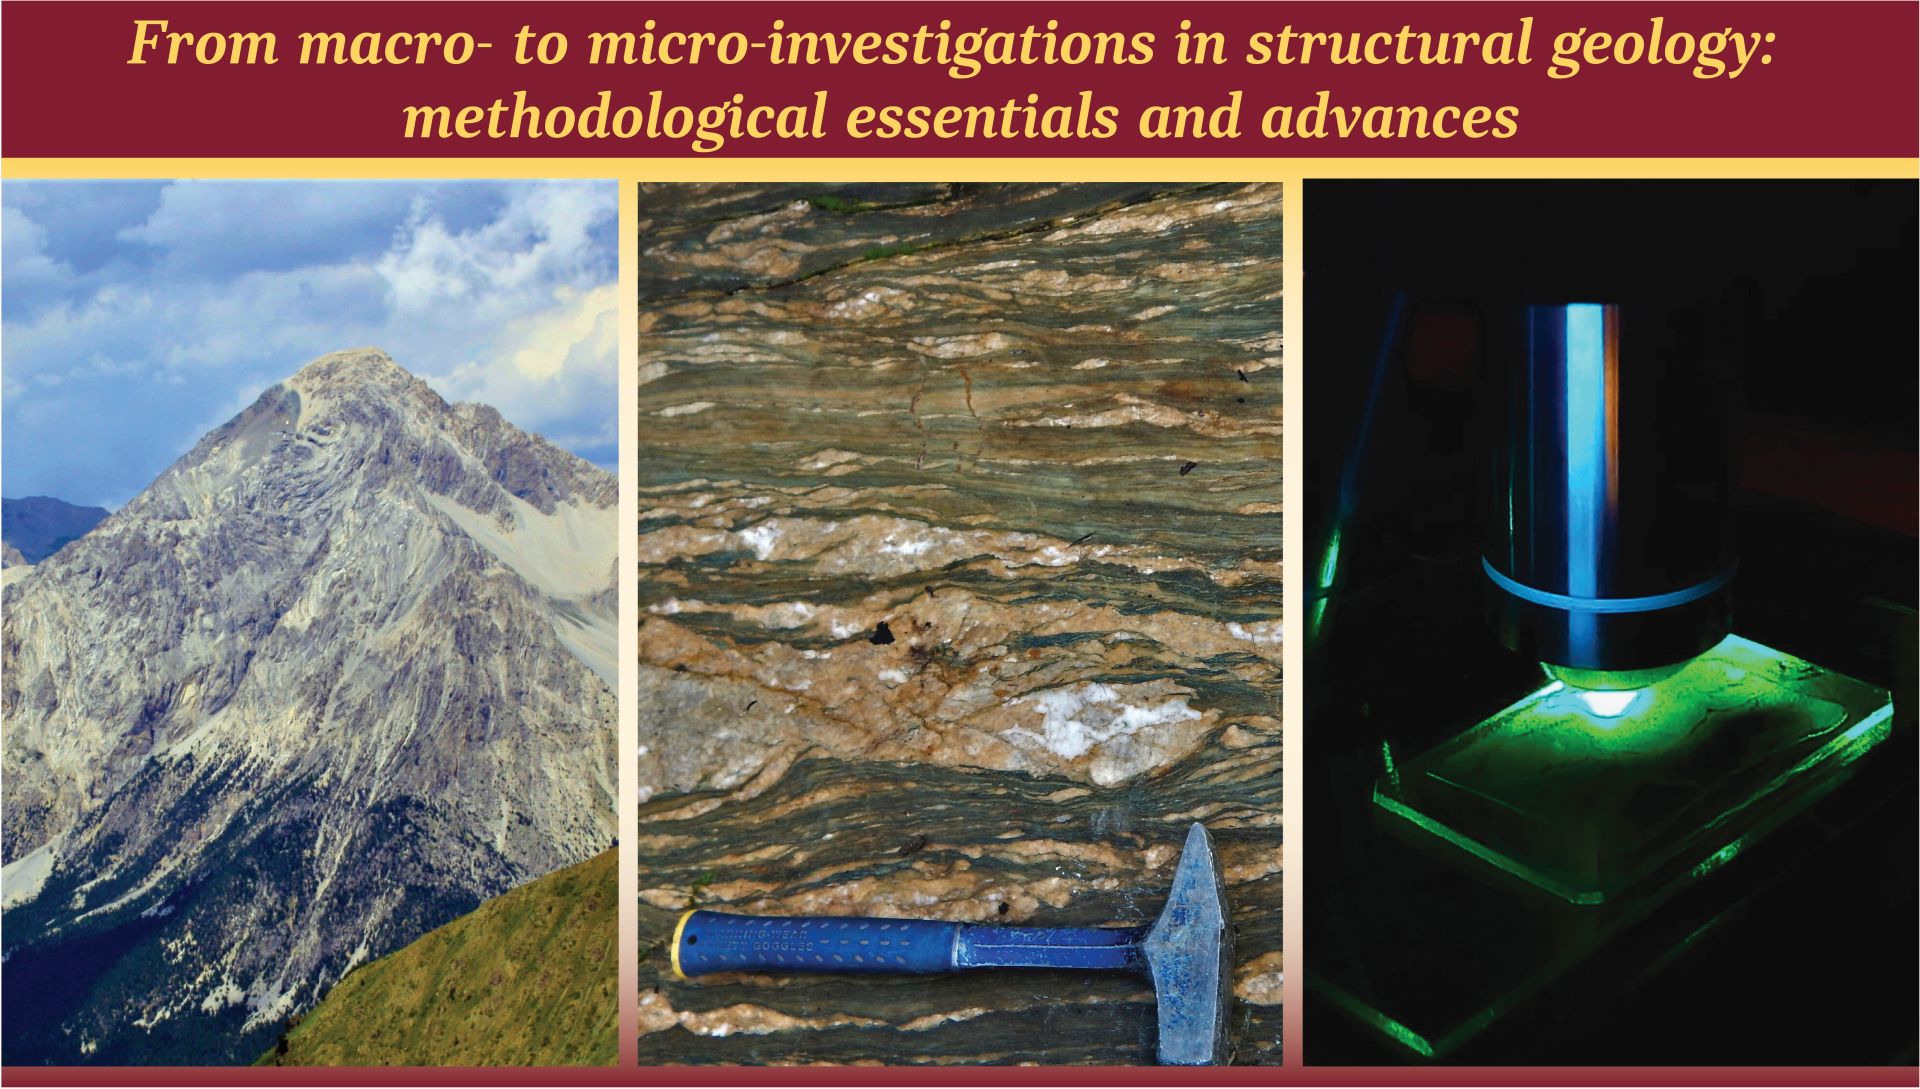 P81. From macro- to micro-investigations in structural geology: methodological essentials and advances